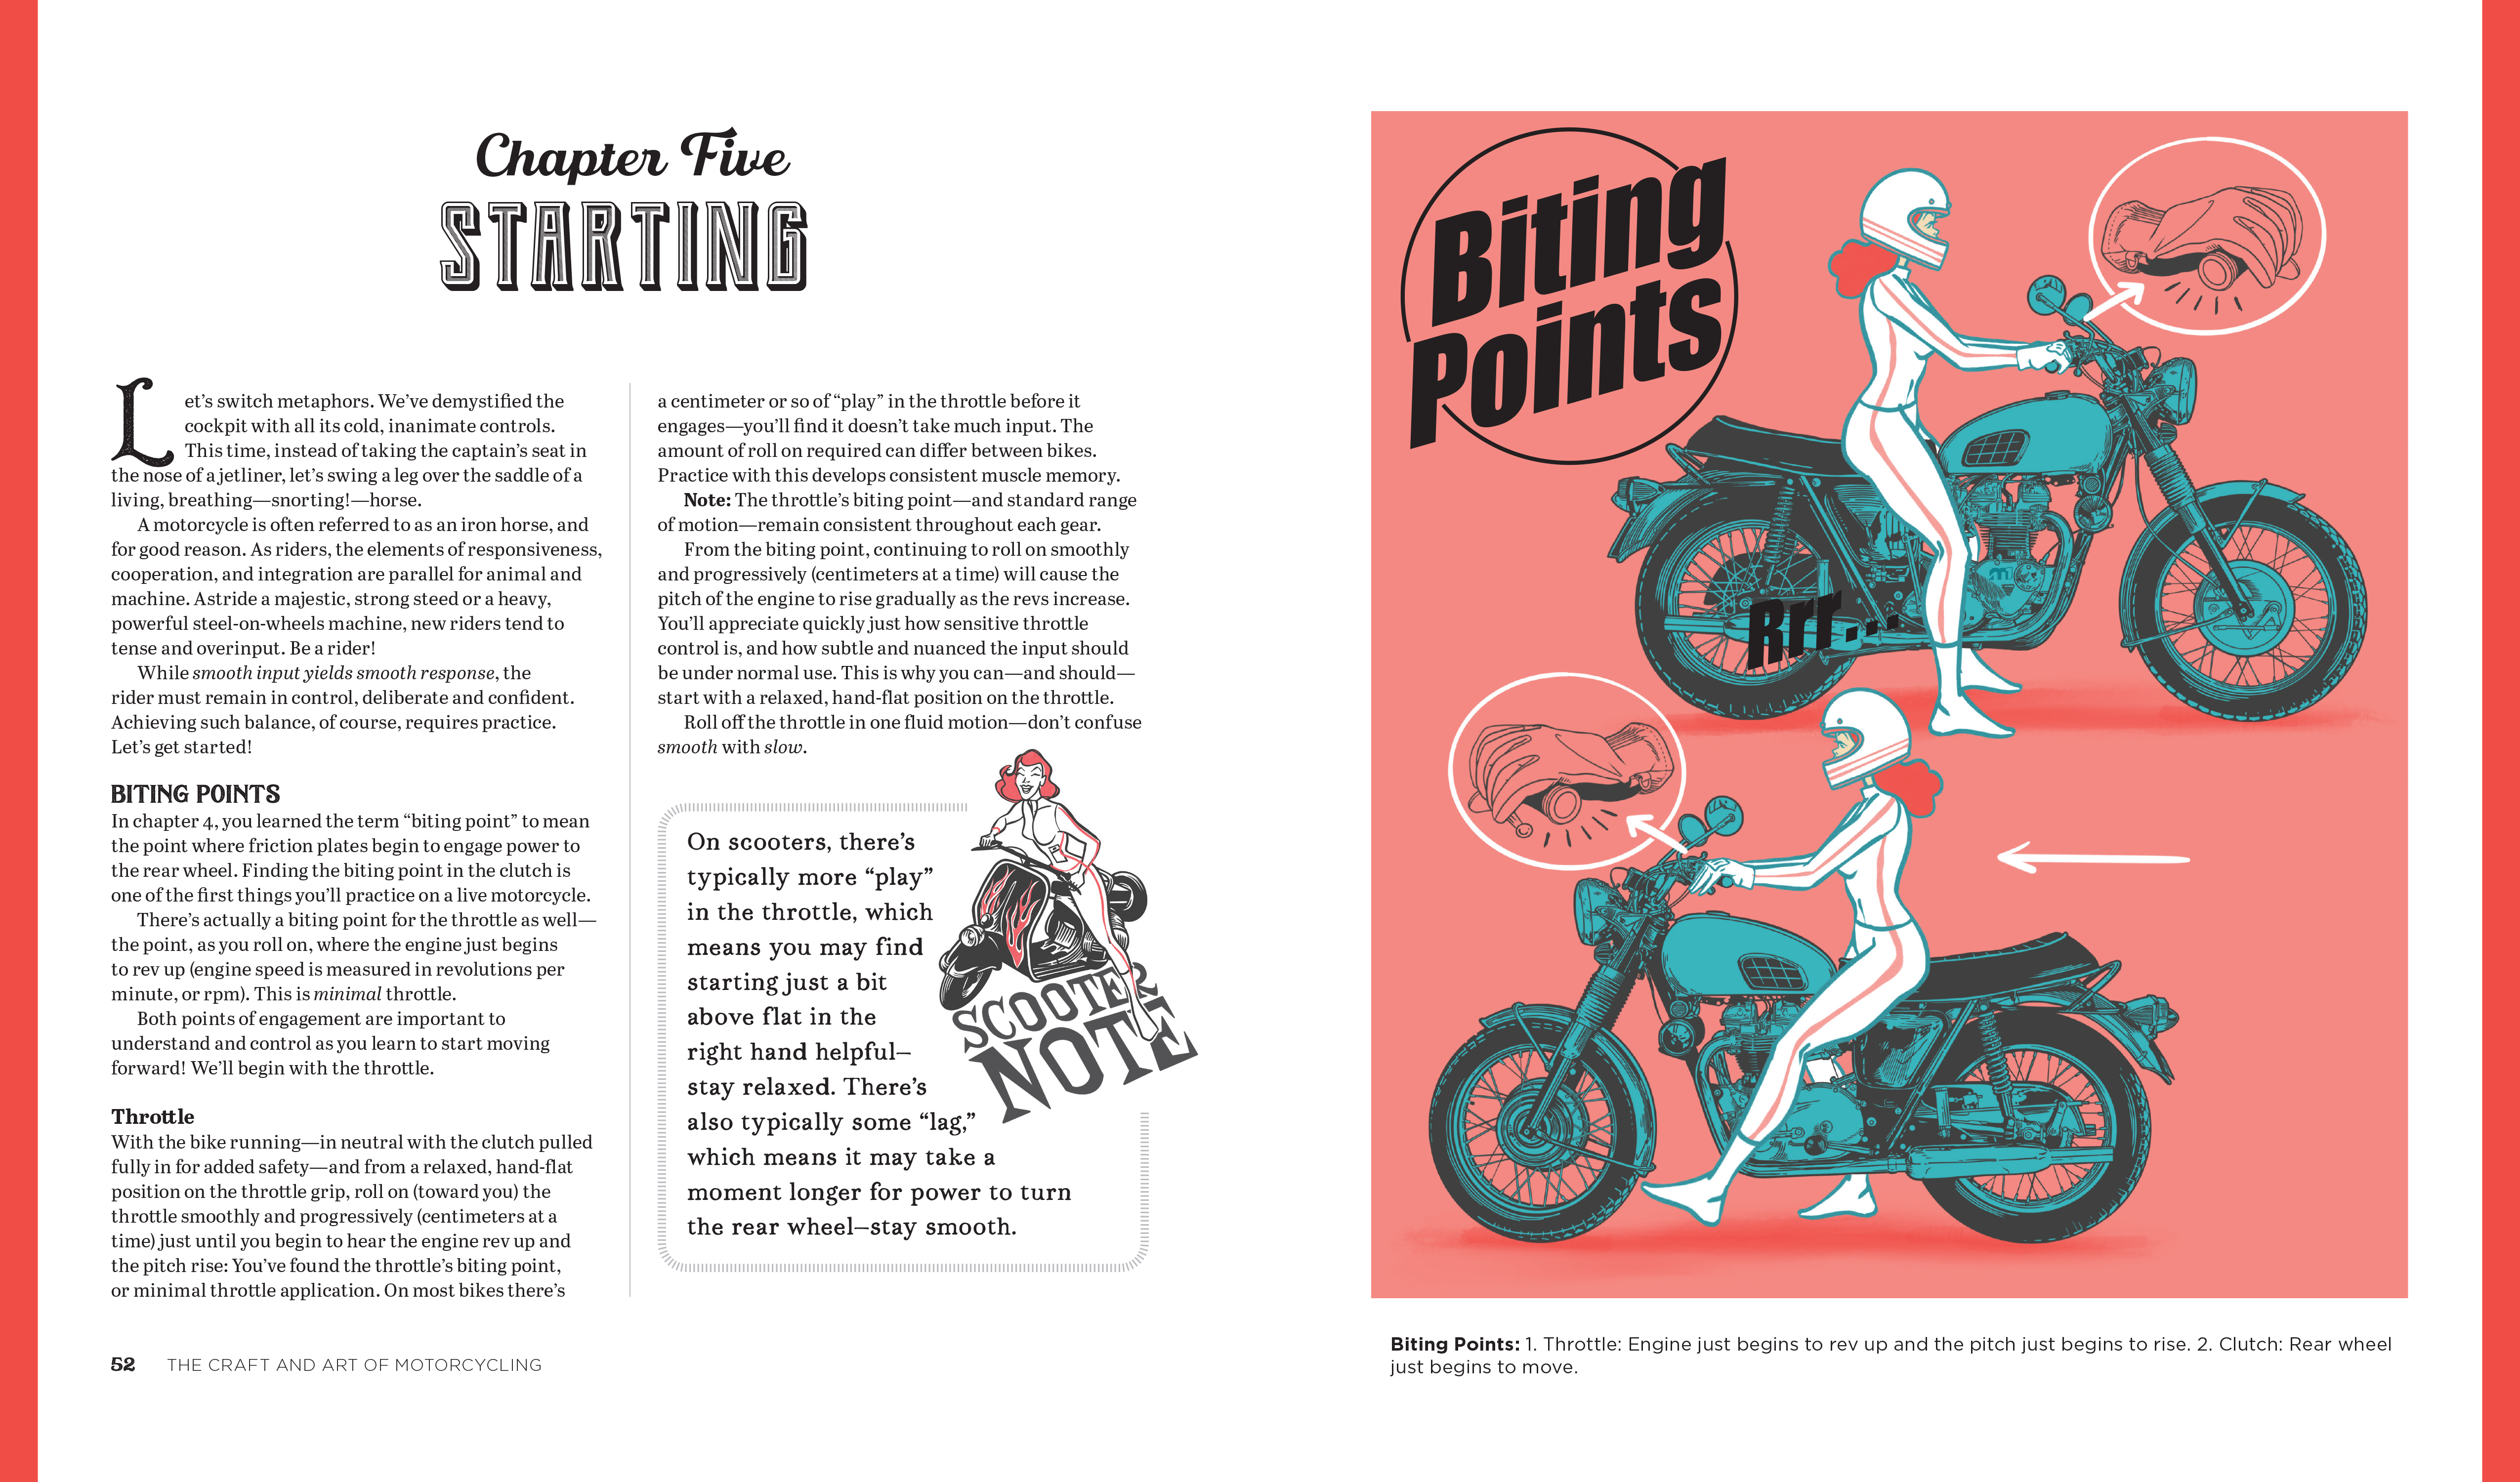 The Craft and Art of Motorcycling